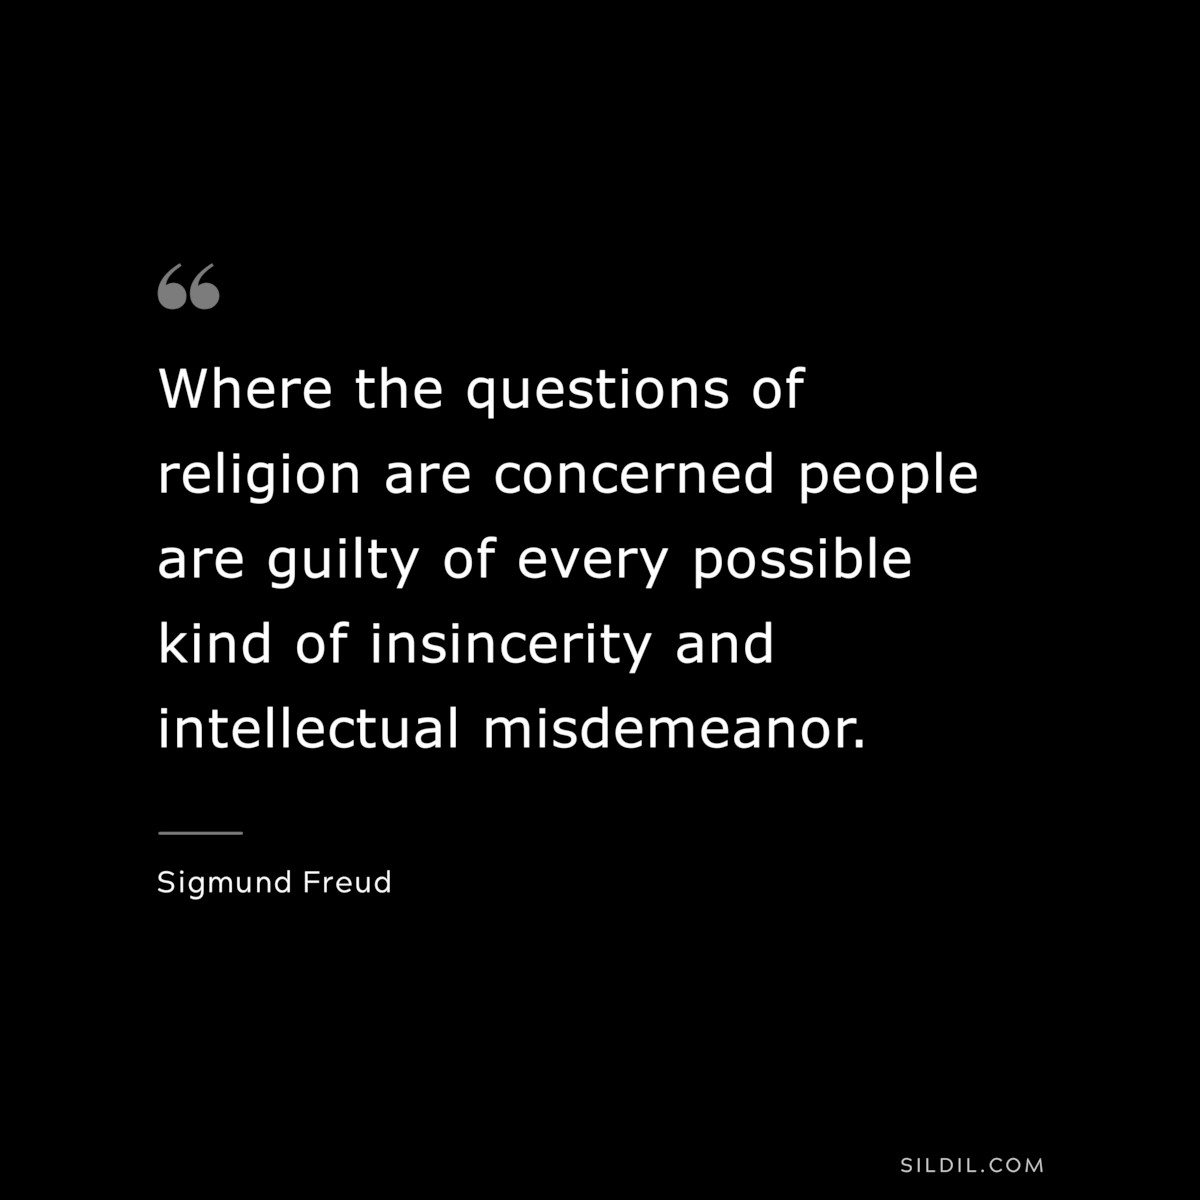 Where the questions of religion are concerned people are guilty of every possible kind of insincerity and intellectual misdemeanor. ― Sigmund Frued